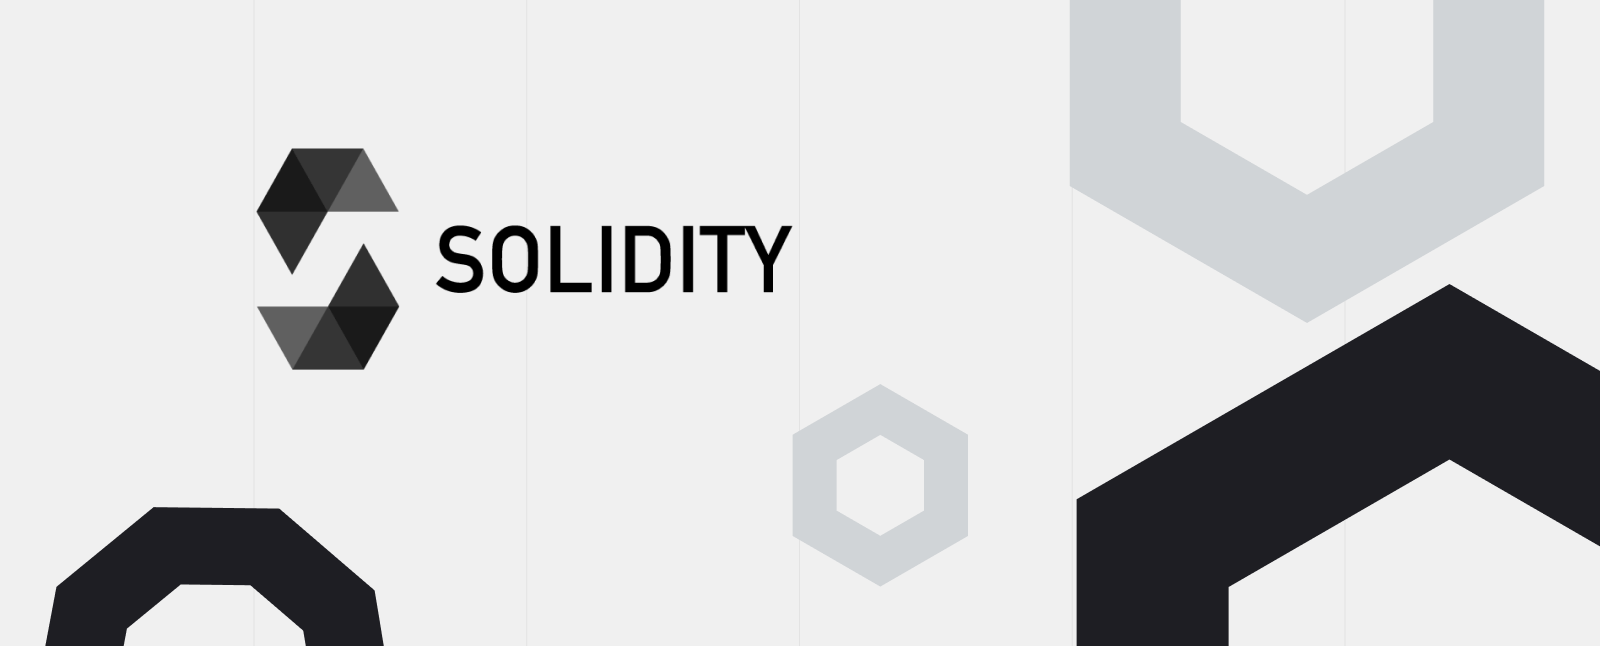 Solidity - a programming language for smart contract development